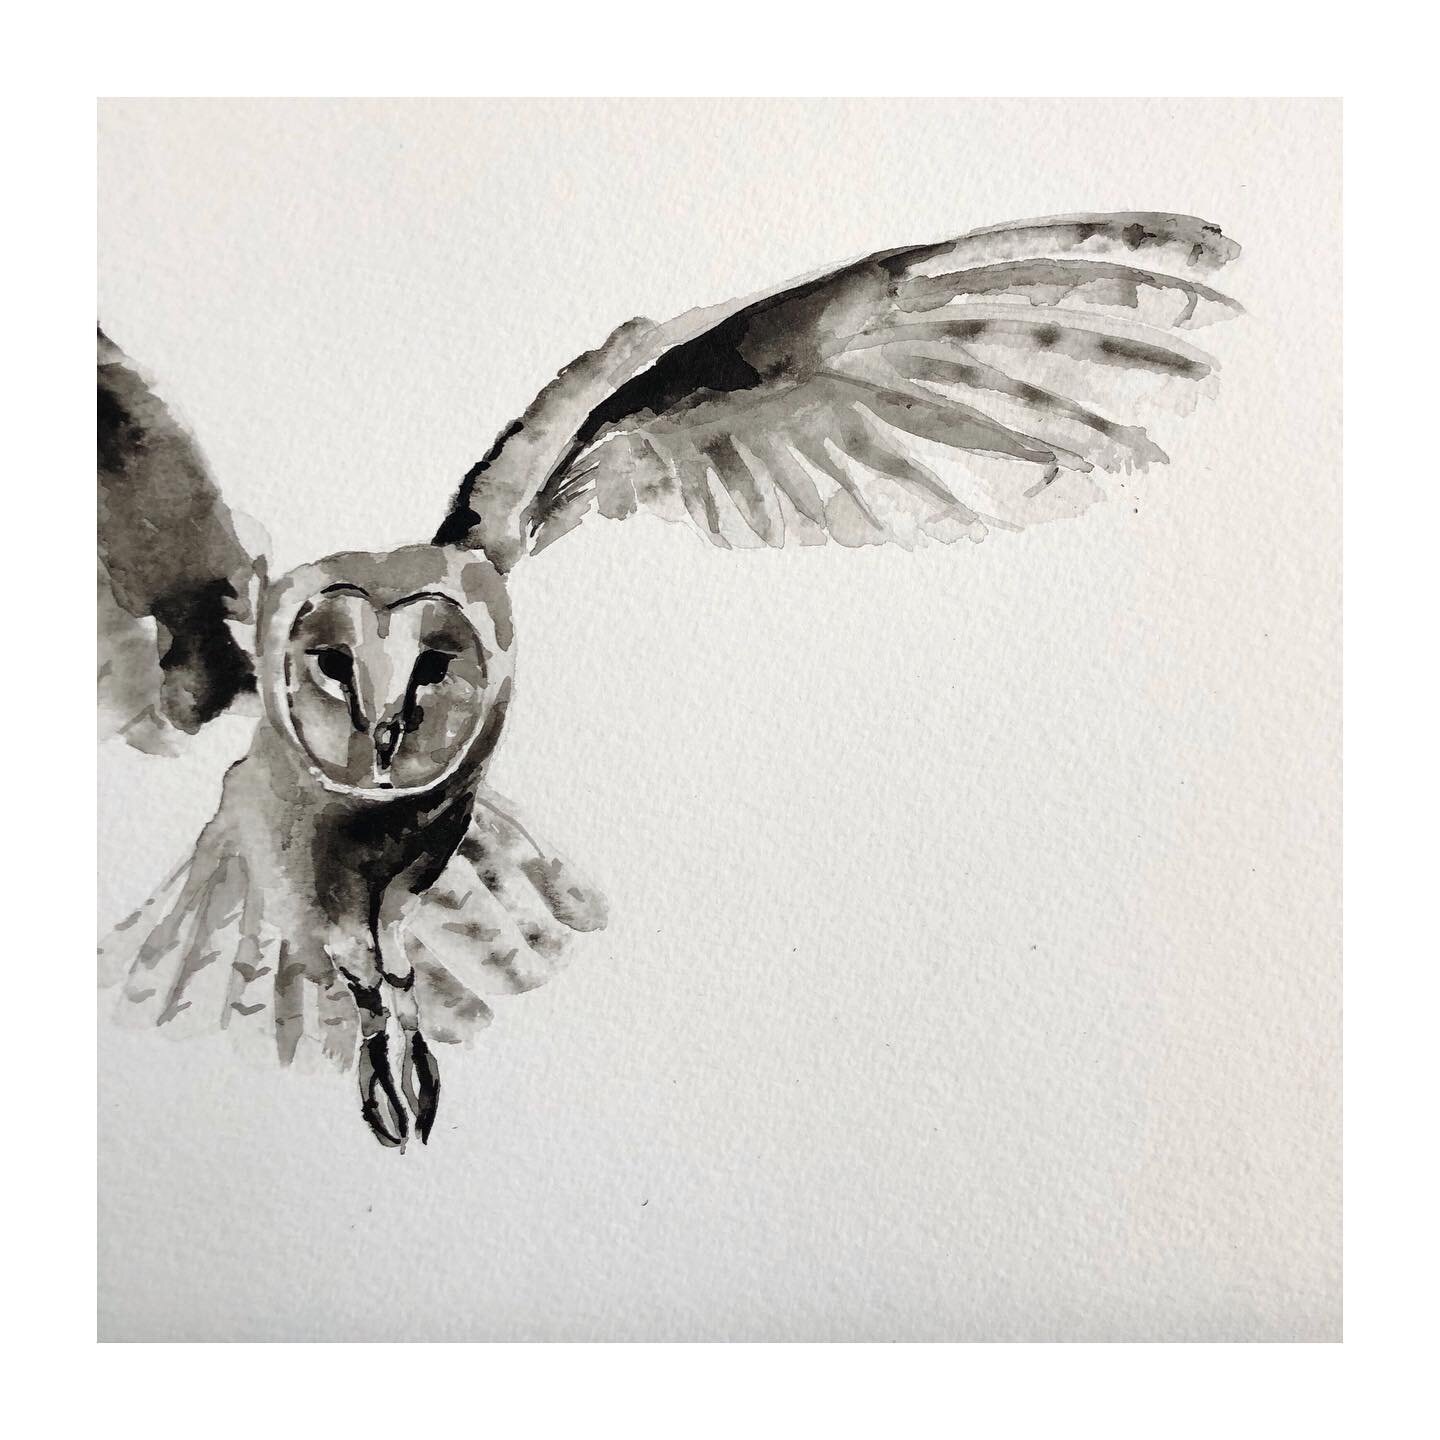 Easing back into it with some preliminary owl studies for a commission piece that&rsquo;s going to be a highly impactful A1 size.

#contemporarywatercolour #mixedmedia #mixedmediaartist #wildlifeartist #natureartist #wildlifeart #modernwatercolour #w